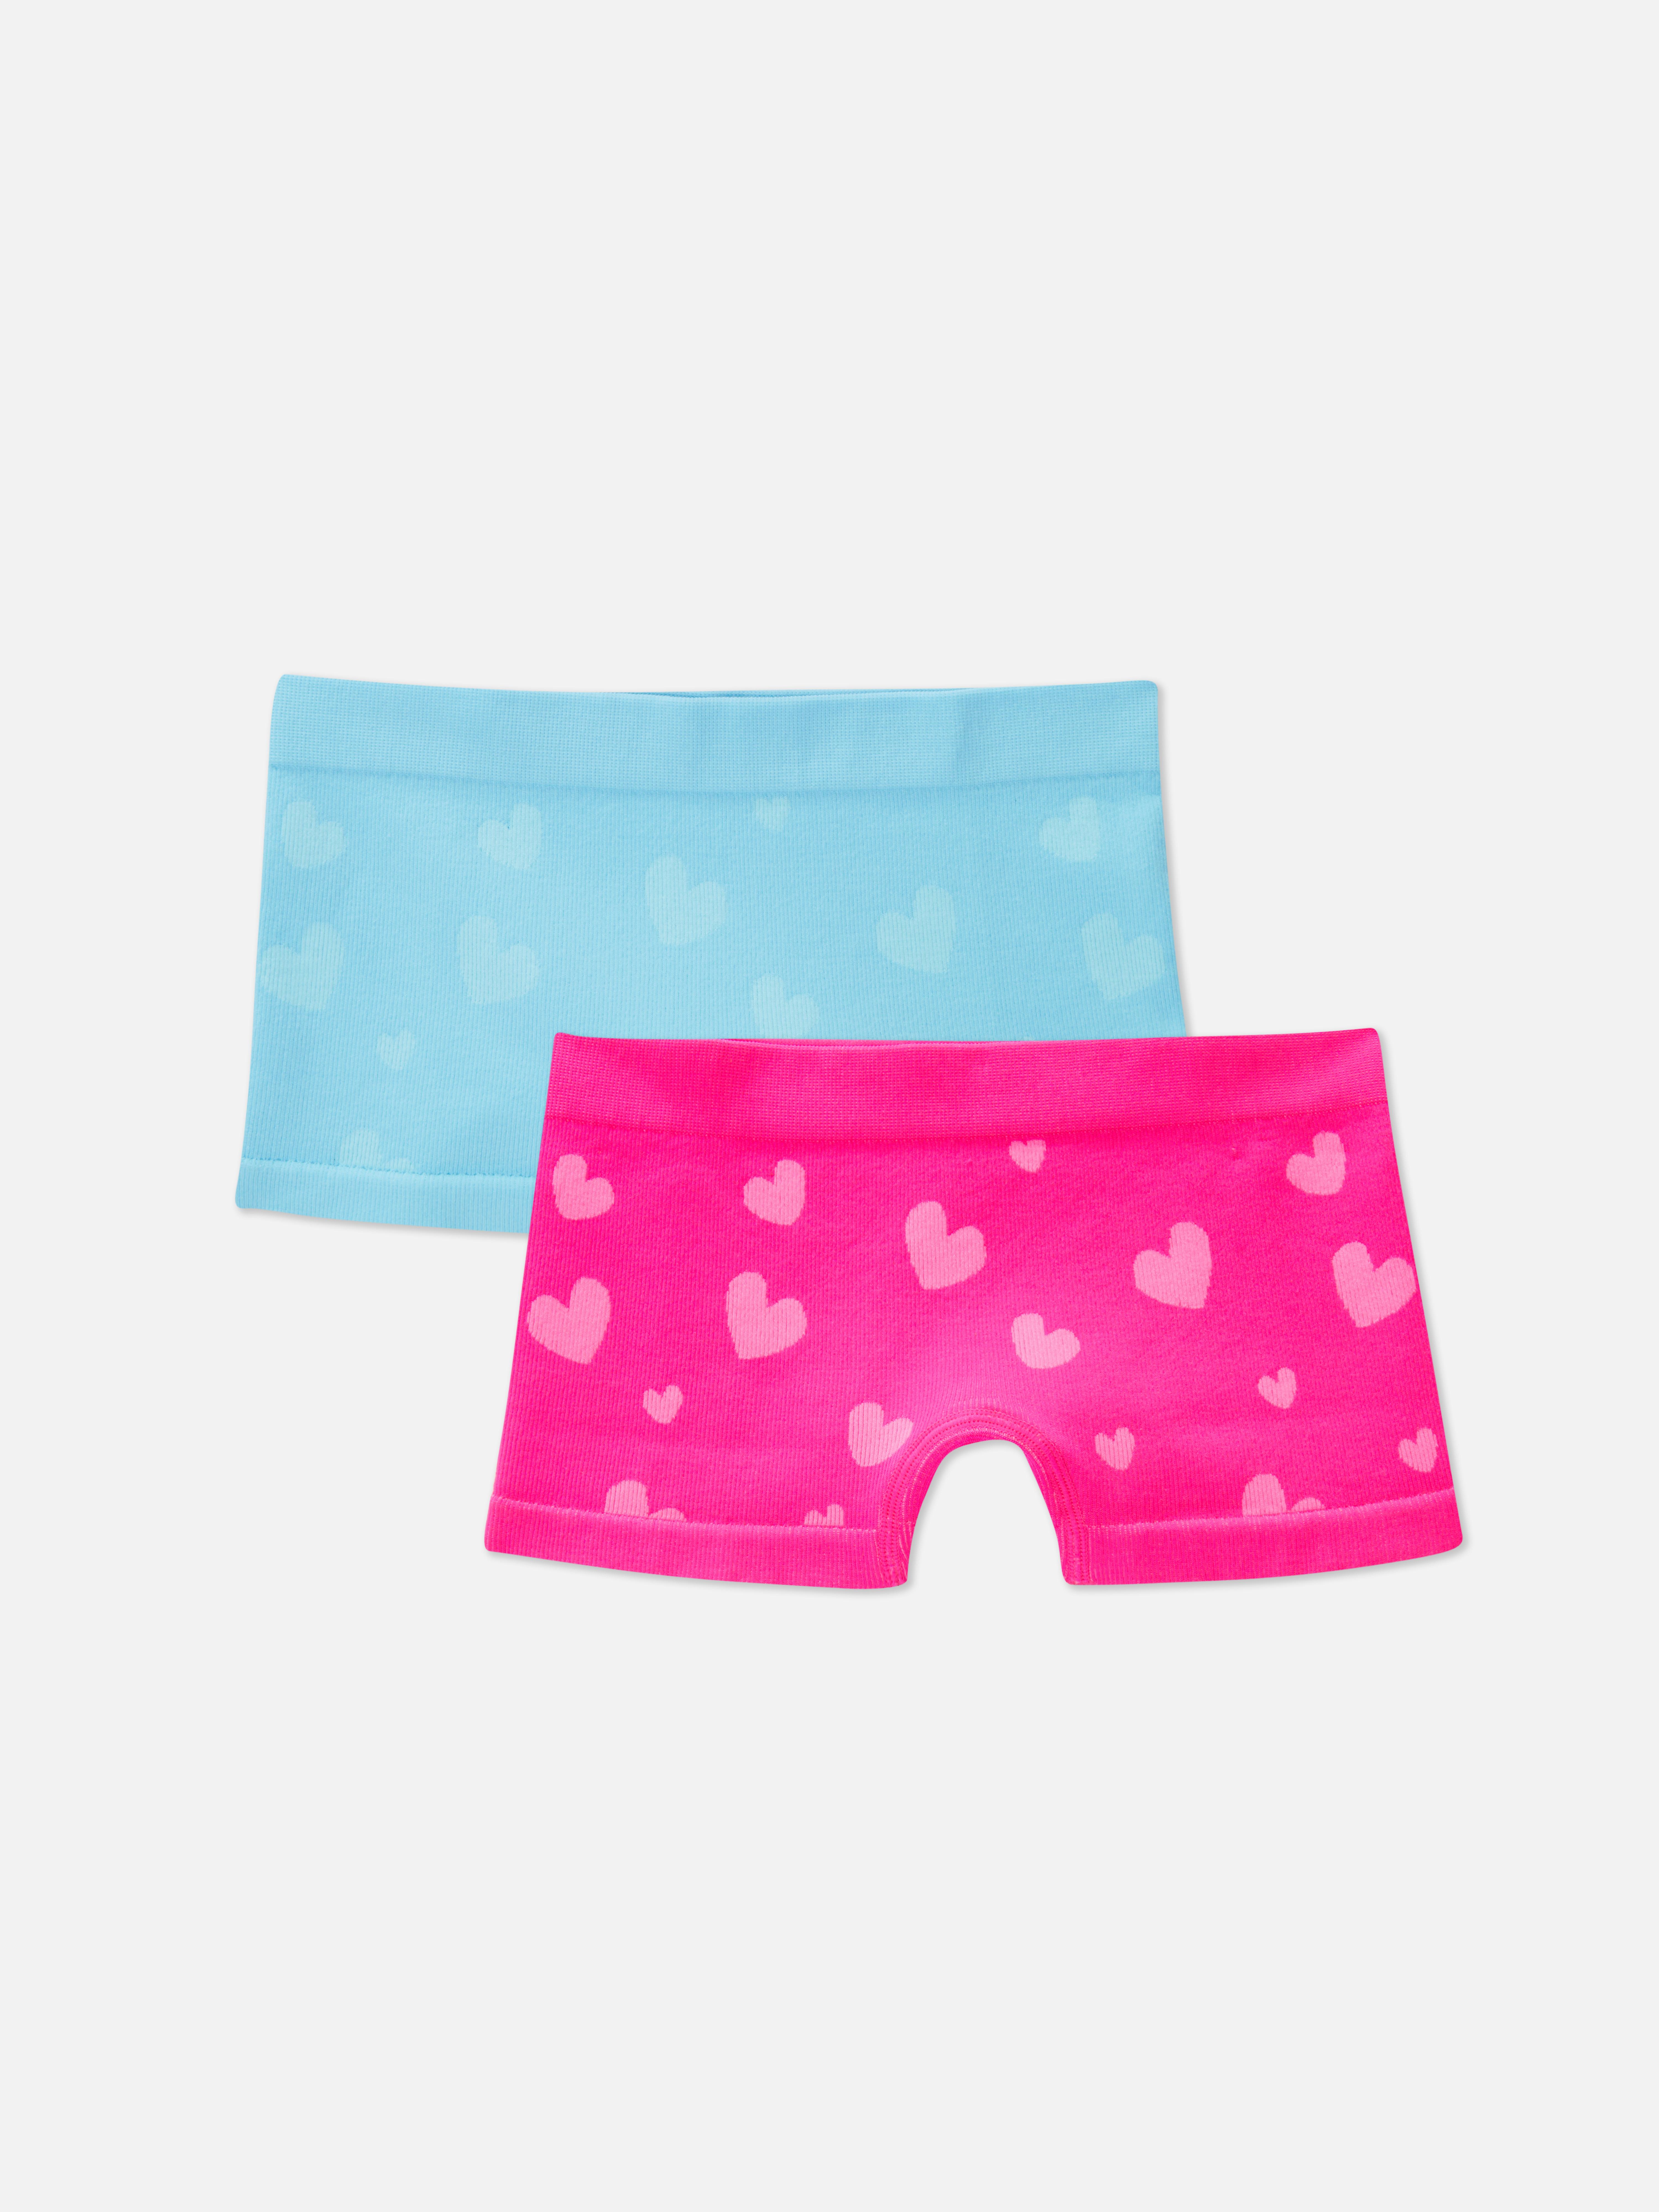 Mens Mickey Mouse Boxer Briefs the Finest Disney Mens Underwear Approved by Mickey  Mouse 